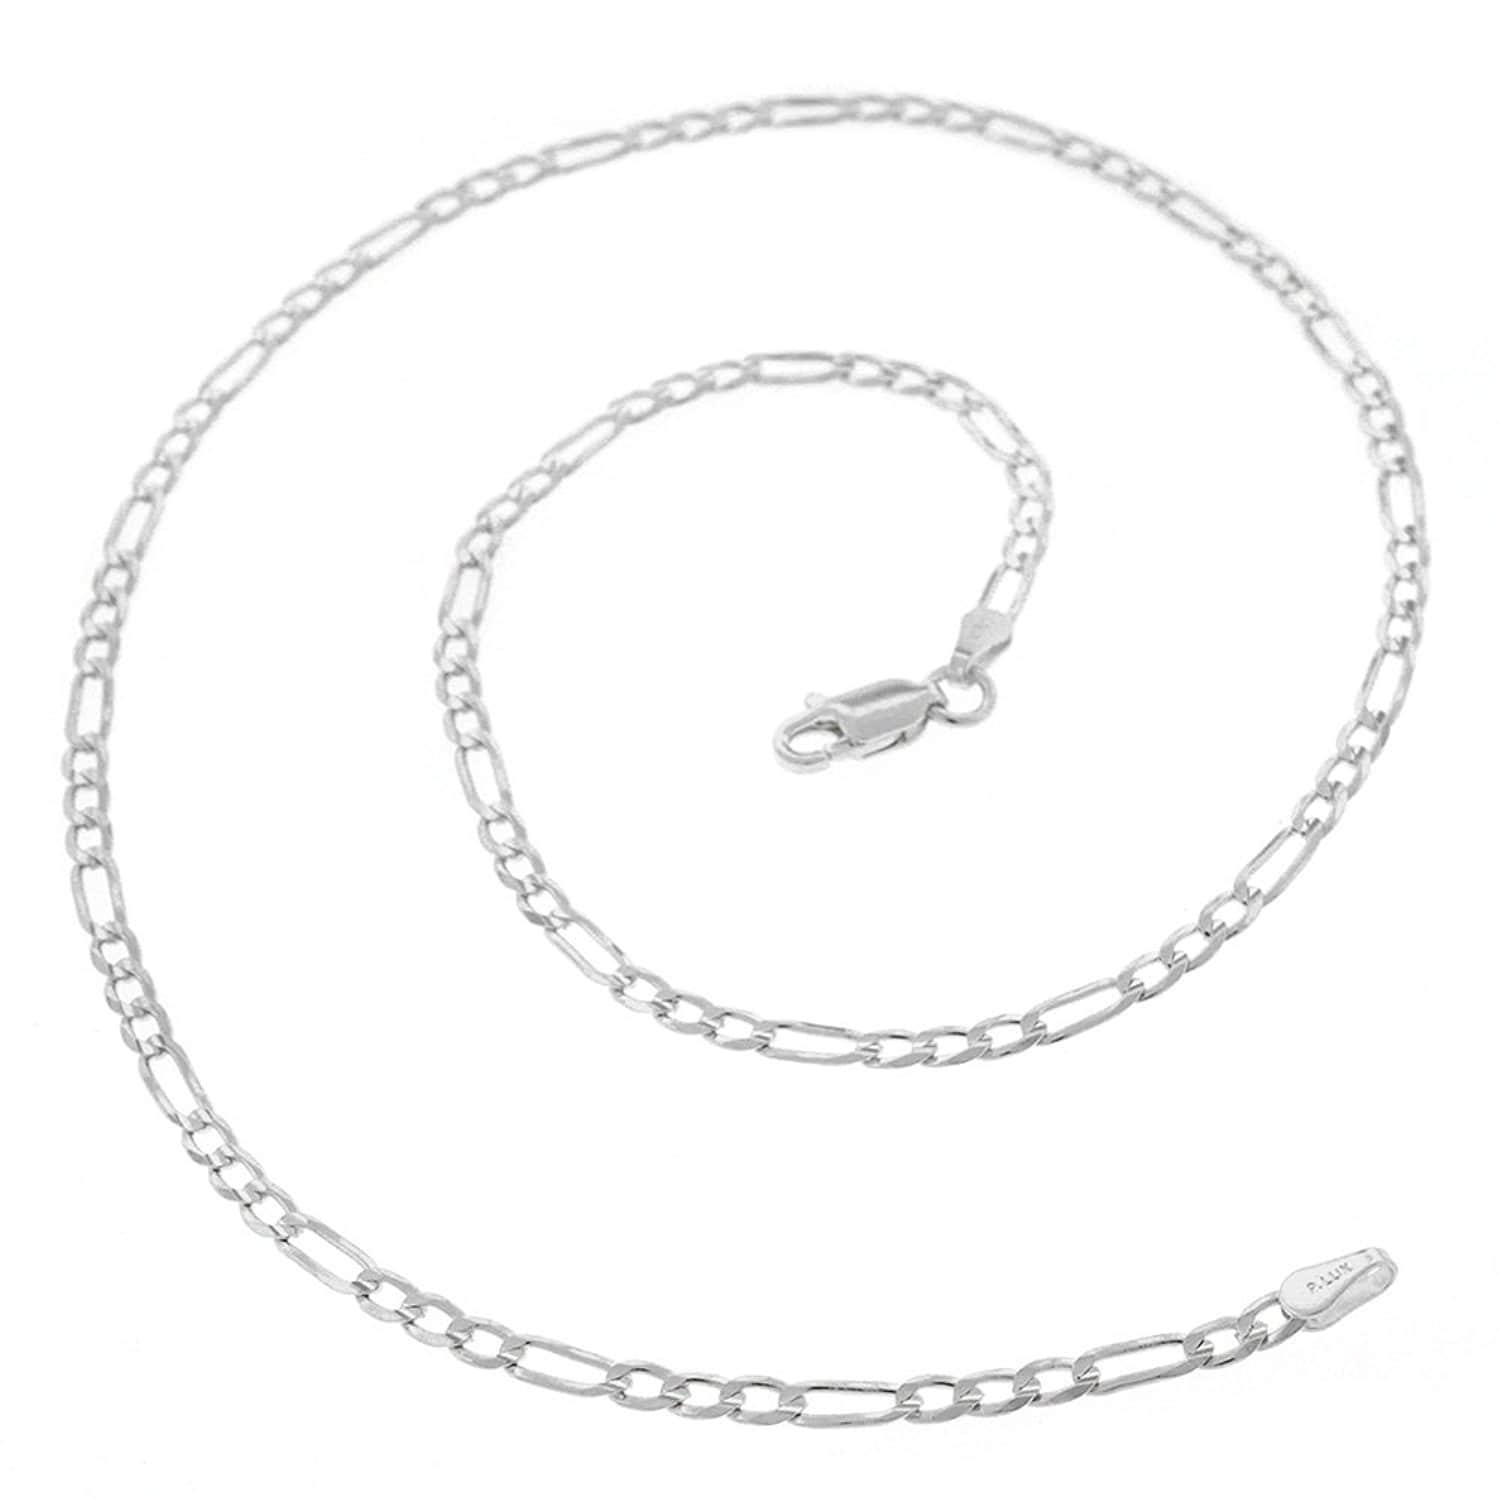 3mm wide unisex necklace ITALY solid 925 sterling silver FIGARO chain